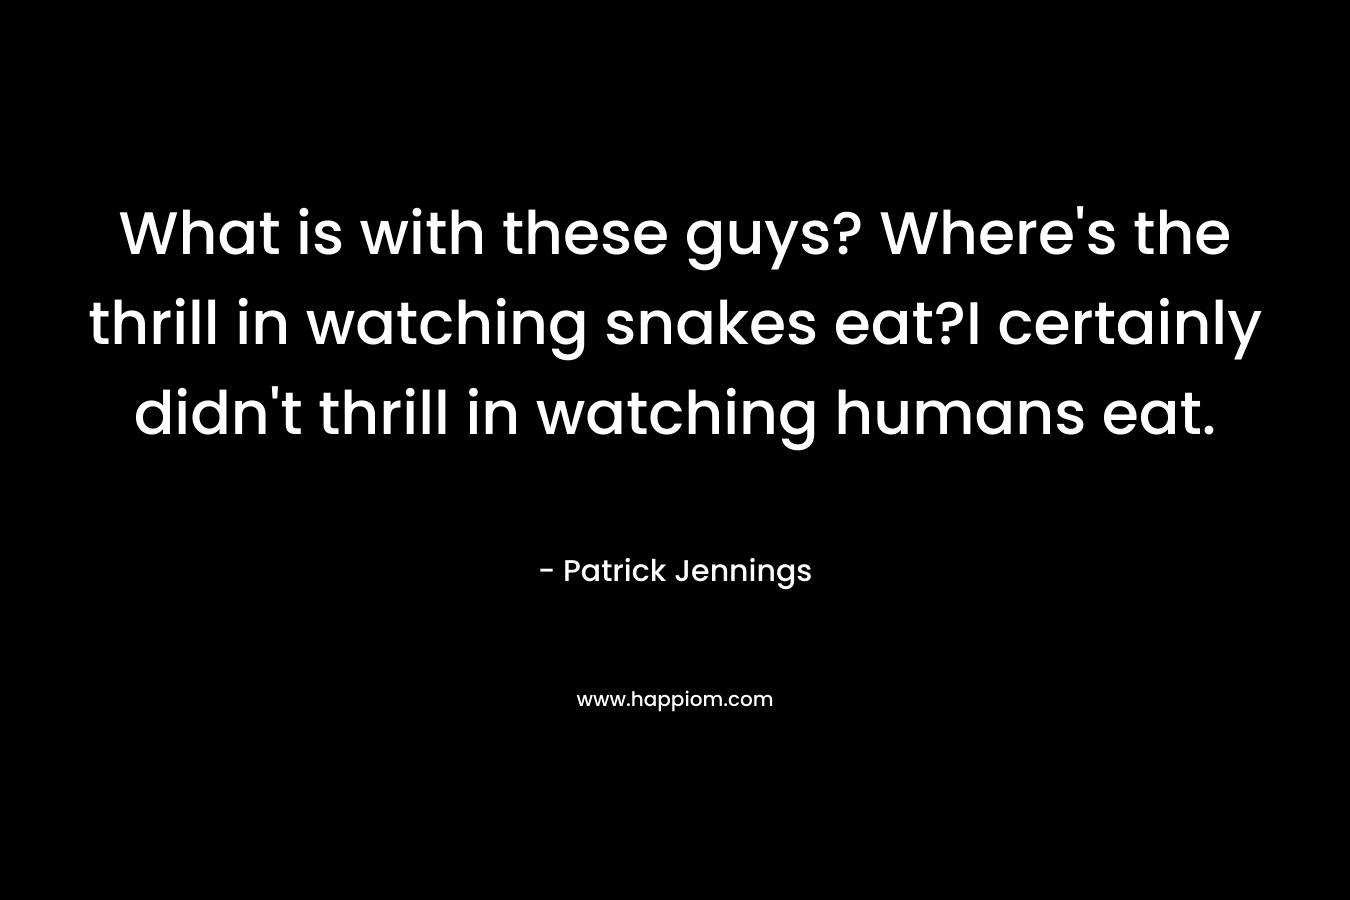 What is with these guys? Where’s the thrill in watching snakes eat?I certainly didn’t thrill in watching humans eat. – Patrick Jennings